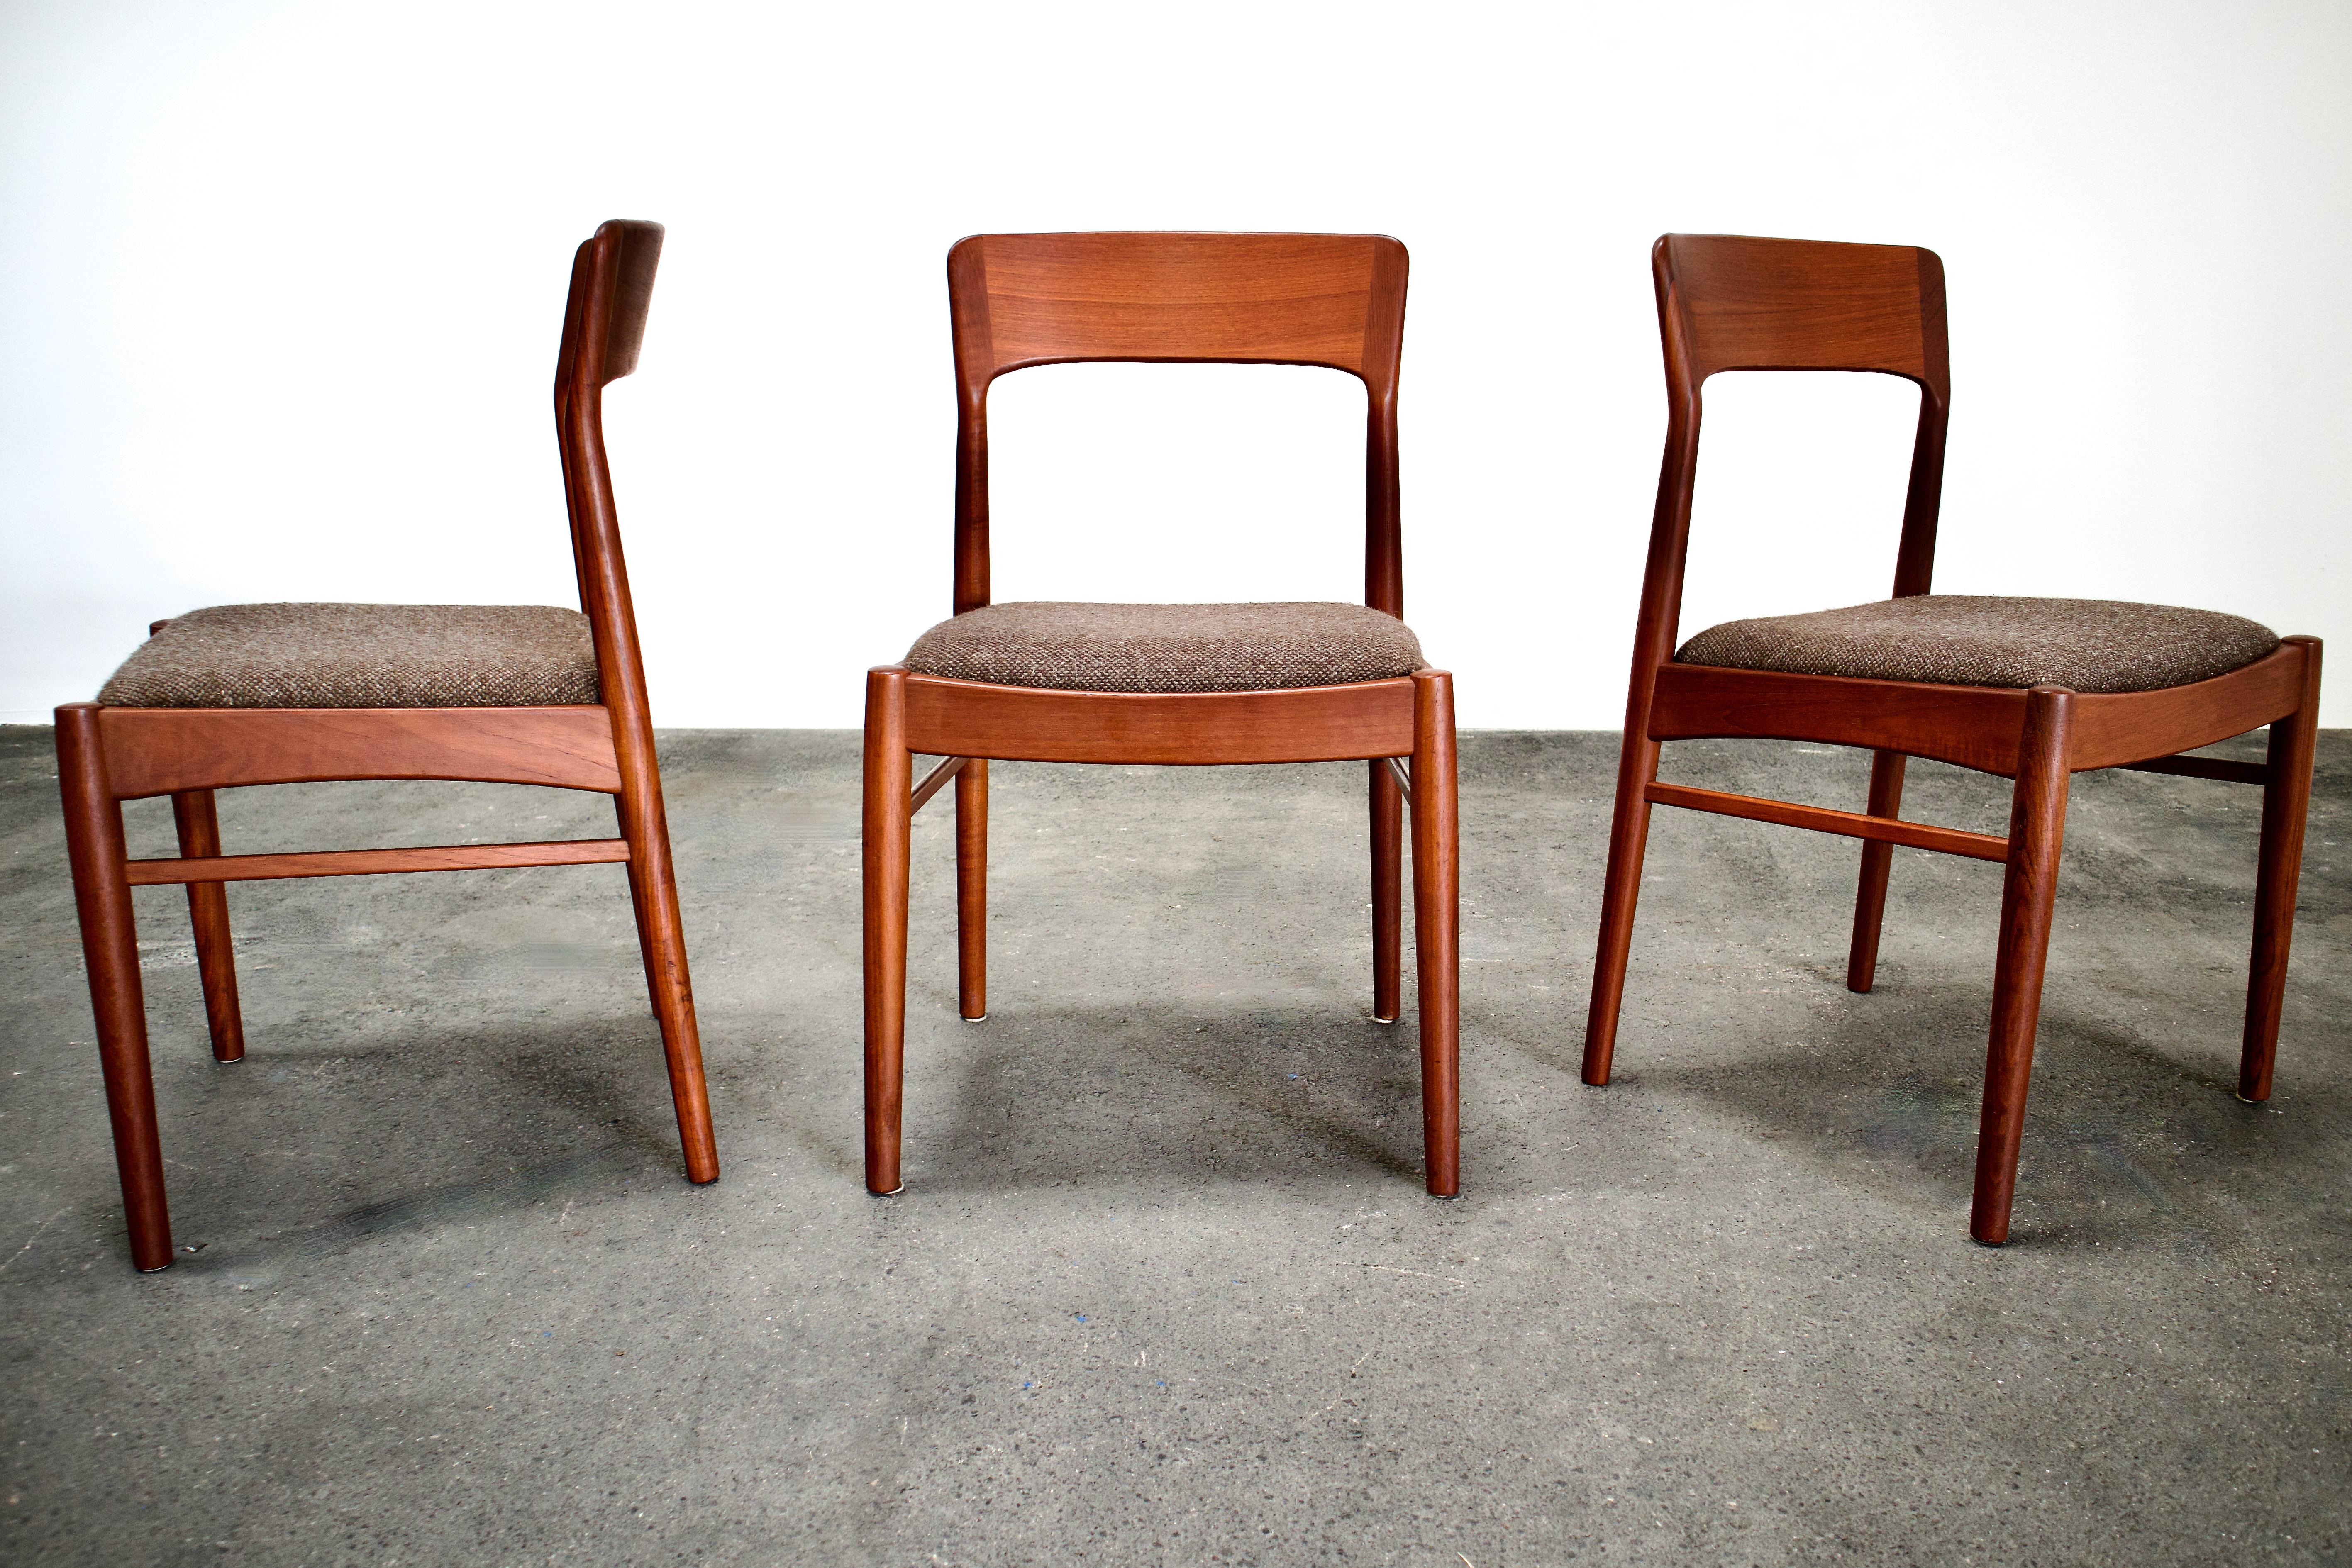 Quirky, cool and extremely beautiful. Carved from solid teak, these gorgeous Mid Century Modern chairs exemplify the finest Scandinavian craftsmanship. Made by K.S. Mobler in Denmark in the 1960s and designed by heavyweight design icon Kai